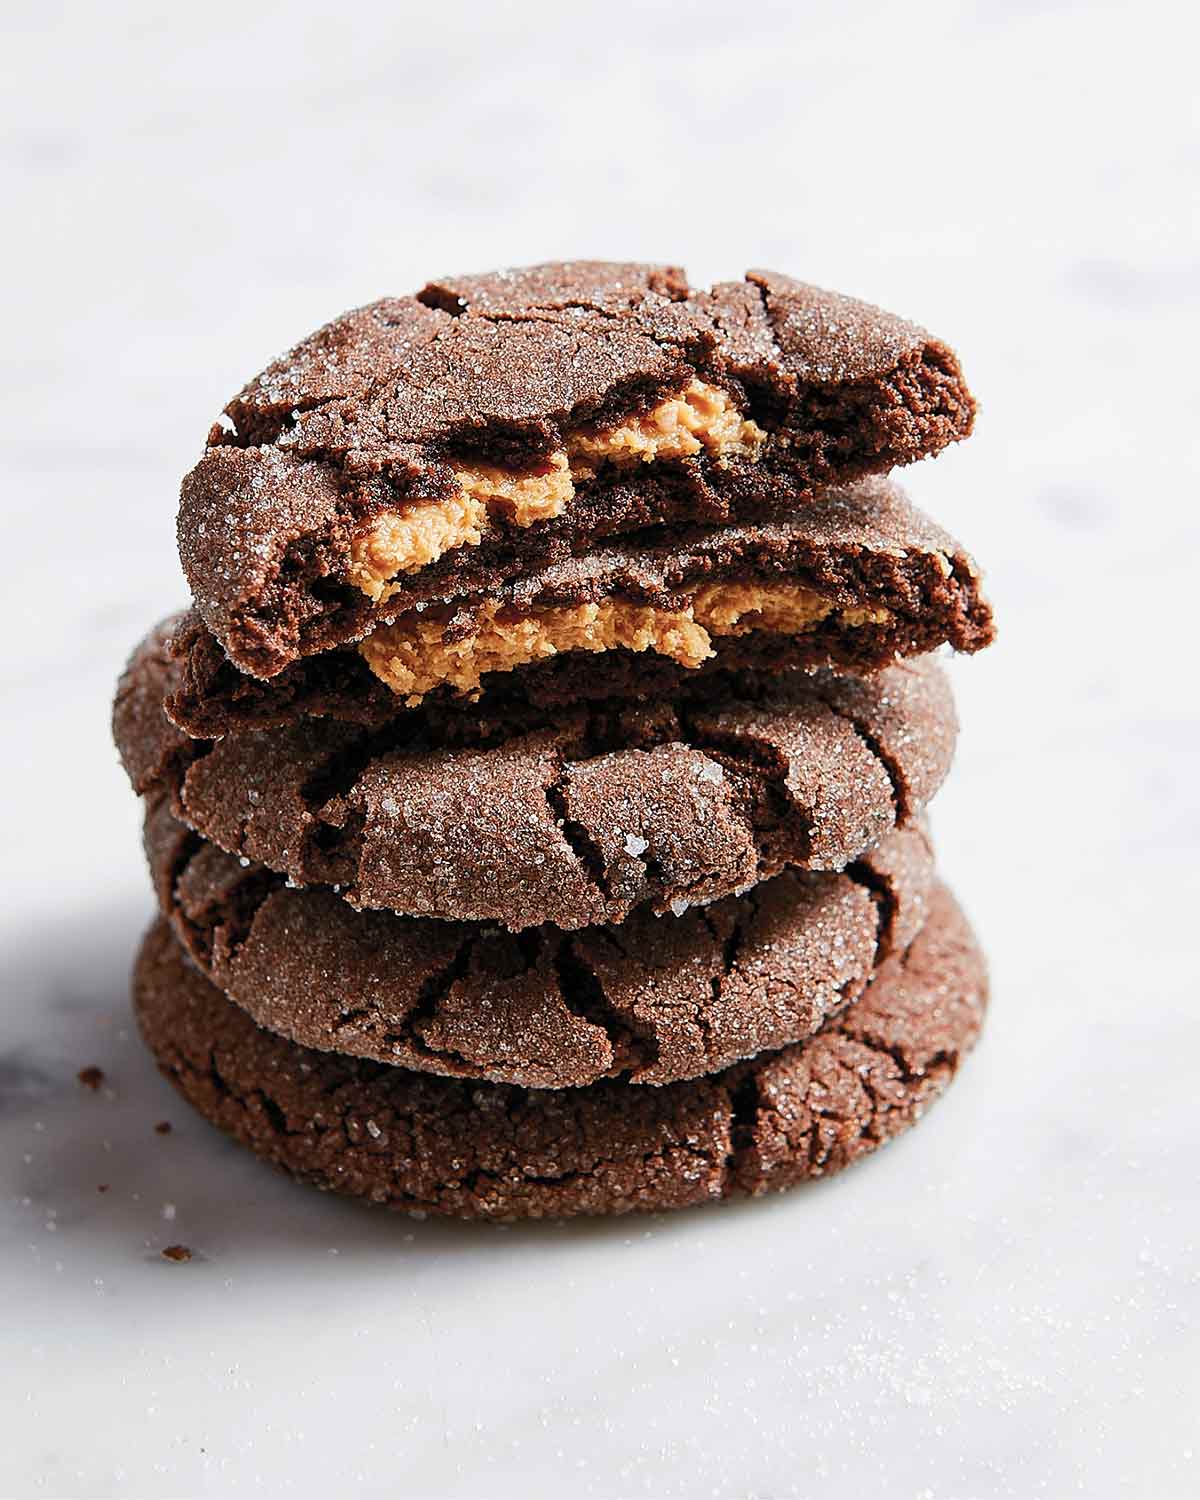 Chocolate peanut butter cookies in a stack, the top one broken in half, on a white background.